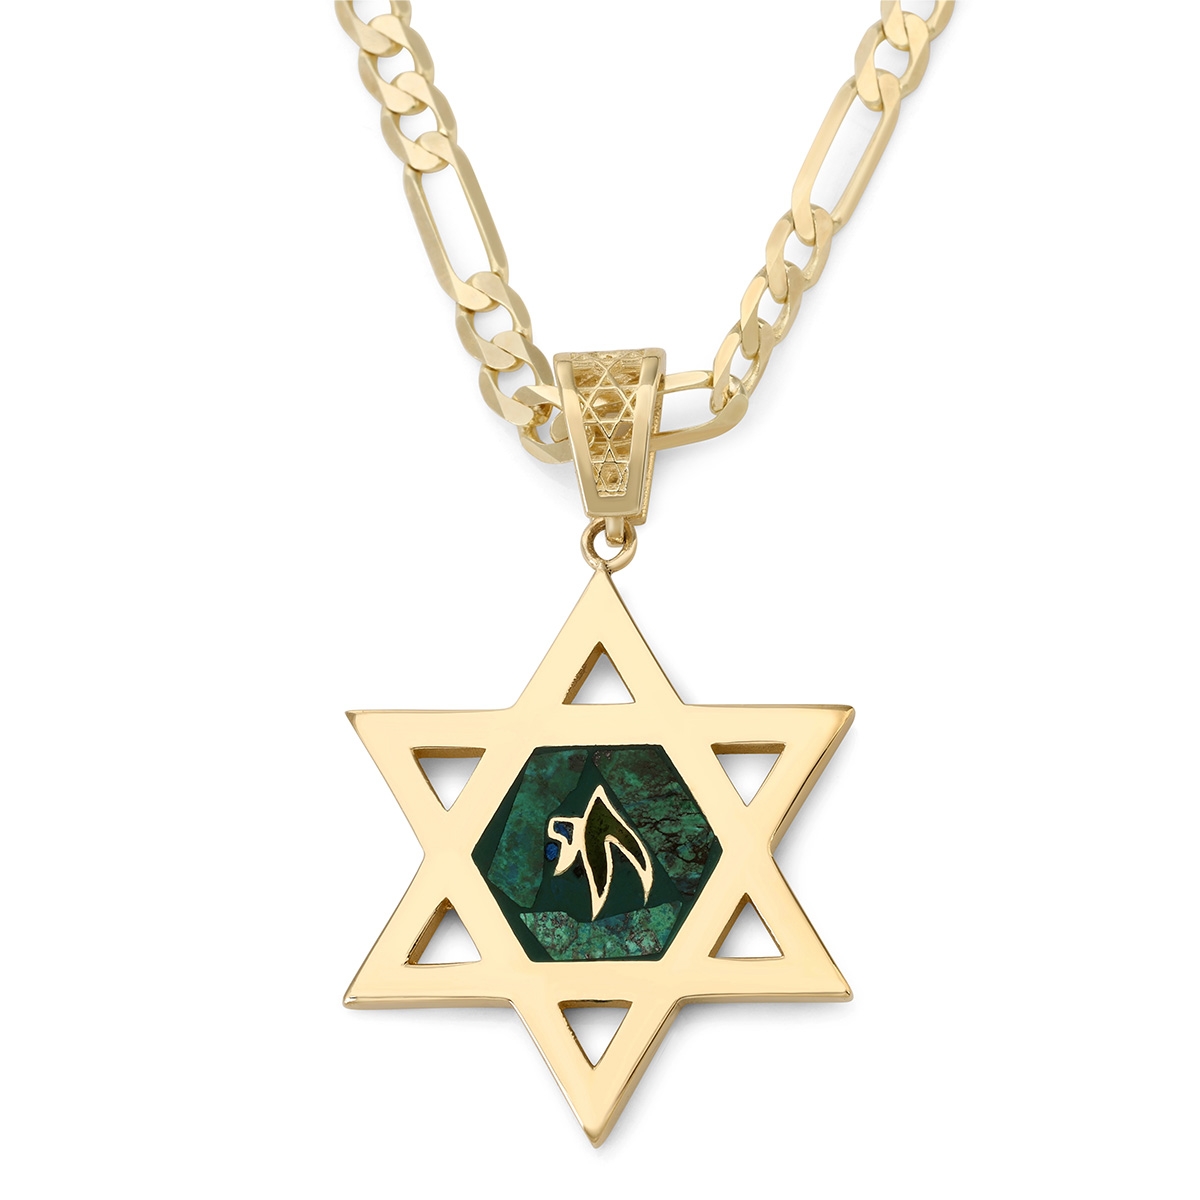 Large 14K Yellow Gold Men's Star of David Pendant with Engraved Chai on Eilat Stone - 1